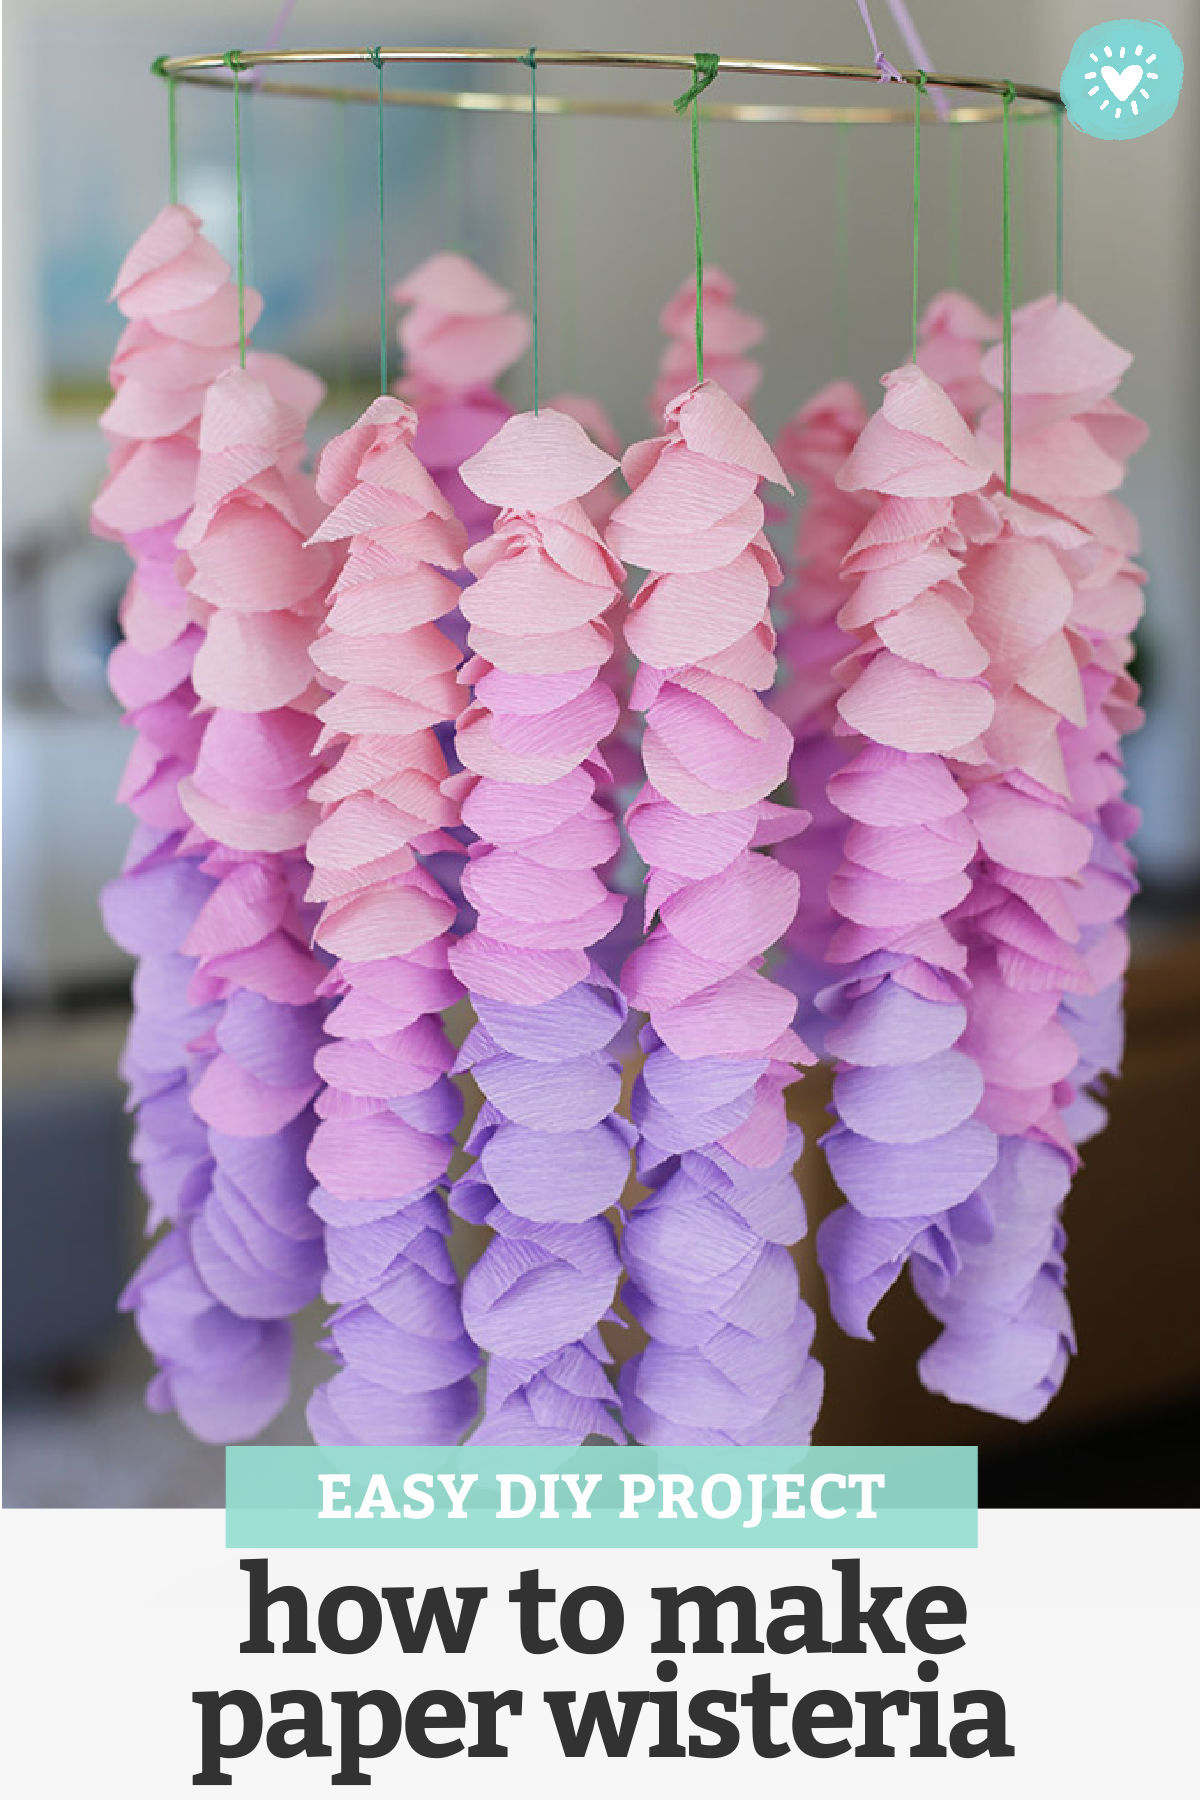 Crepe Paper Wisteria Hanging from a Gold Embroidery Hoop with text overlay that reads "Easy DIY Project - How to Make Paper Wisteria"